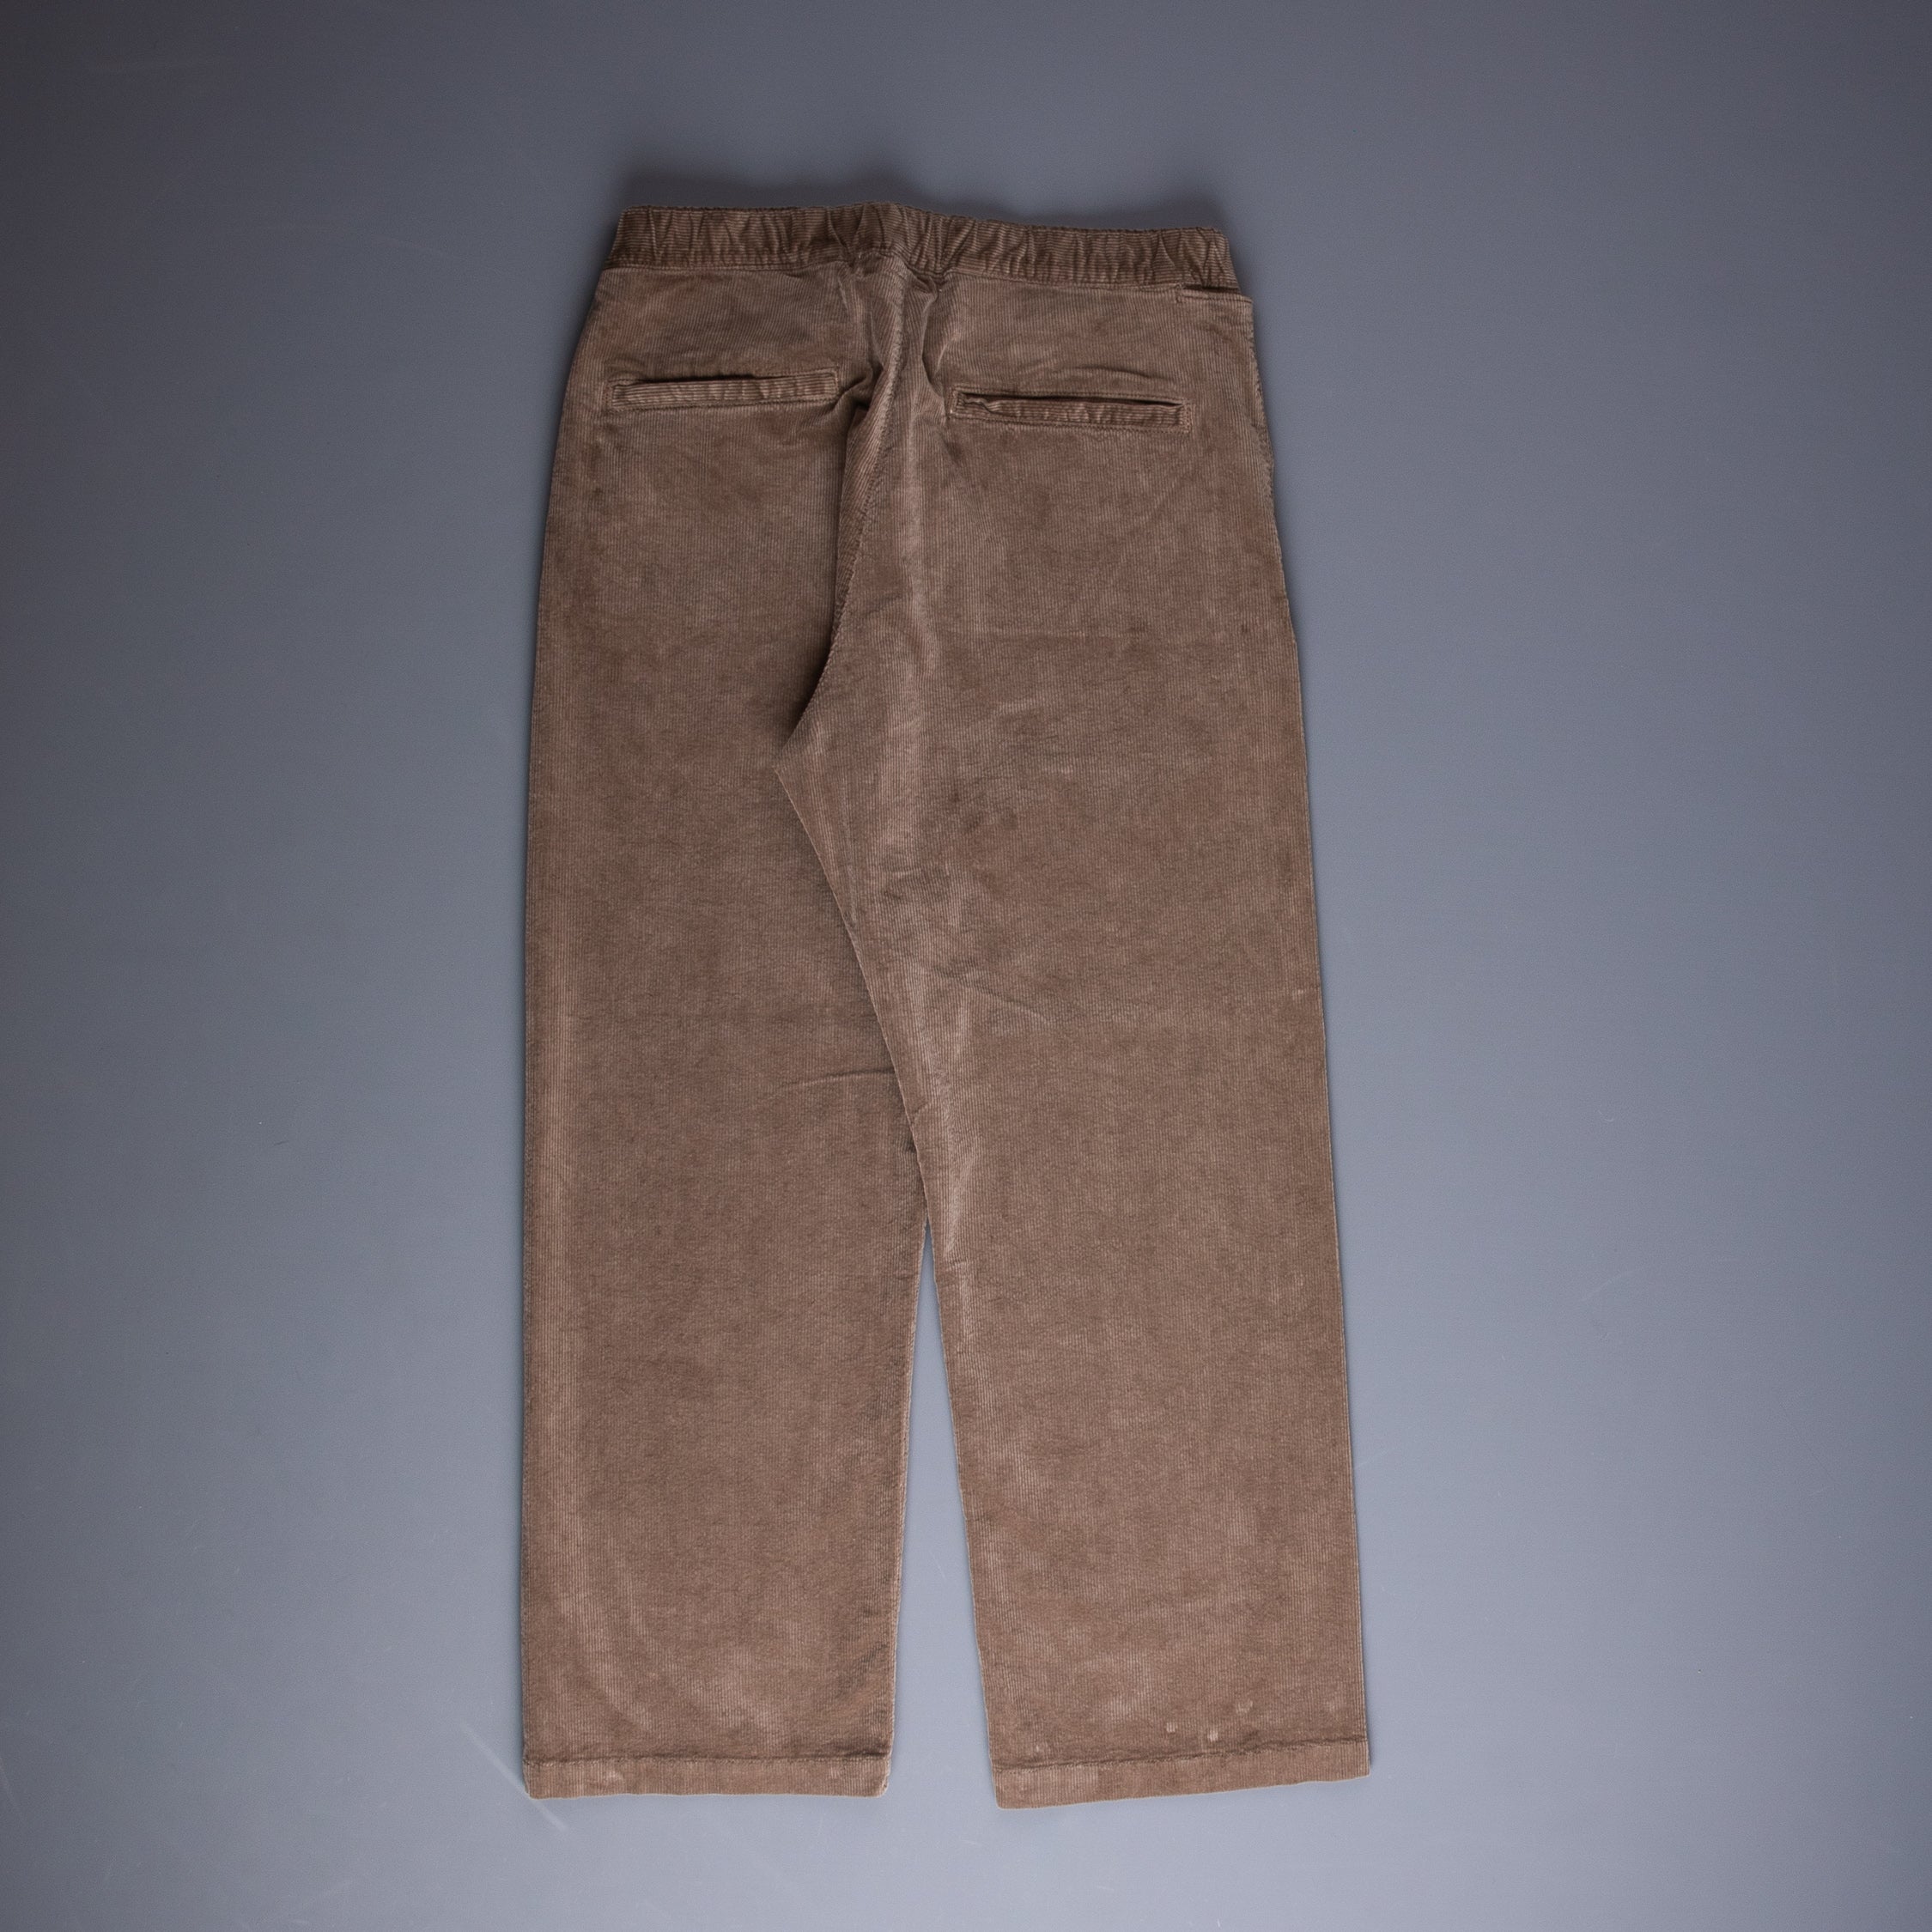 Remi Relief 11-Wale Corduroy Pants Beige – Frans Boone Store